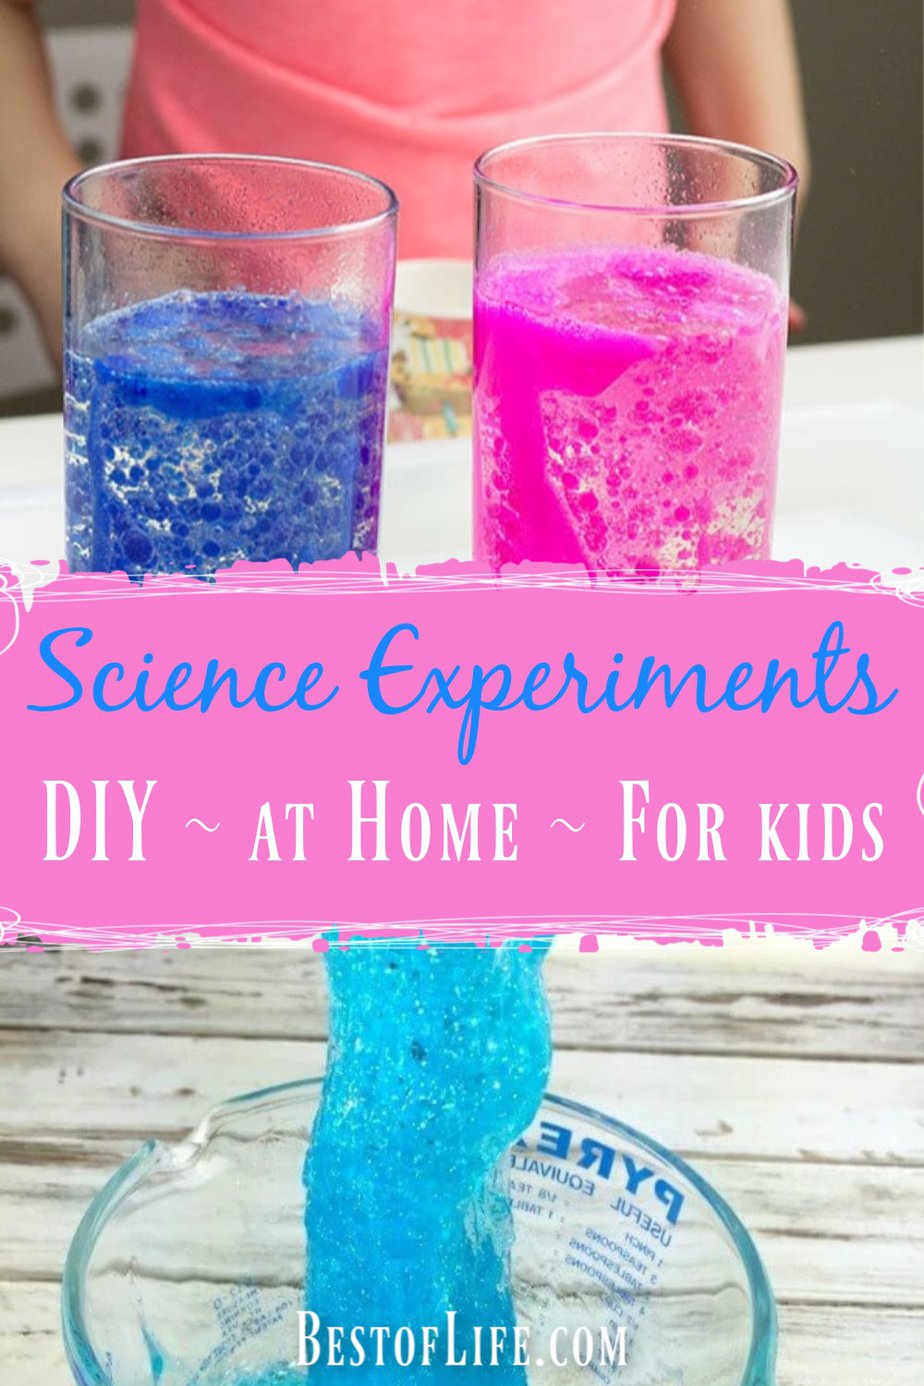 DIY science experiments for kids at home are great ways for parents to keep children engaged and learning and are fun things to do with kids. Activities for Kids at Home | DIY Activities | At Home Science Activities | DIY Homeschooling Ideas | Parenting Ideas | Safe Science Projects for Kids #science #parenting via @thebestoflife